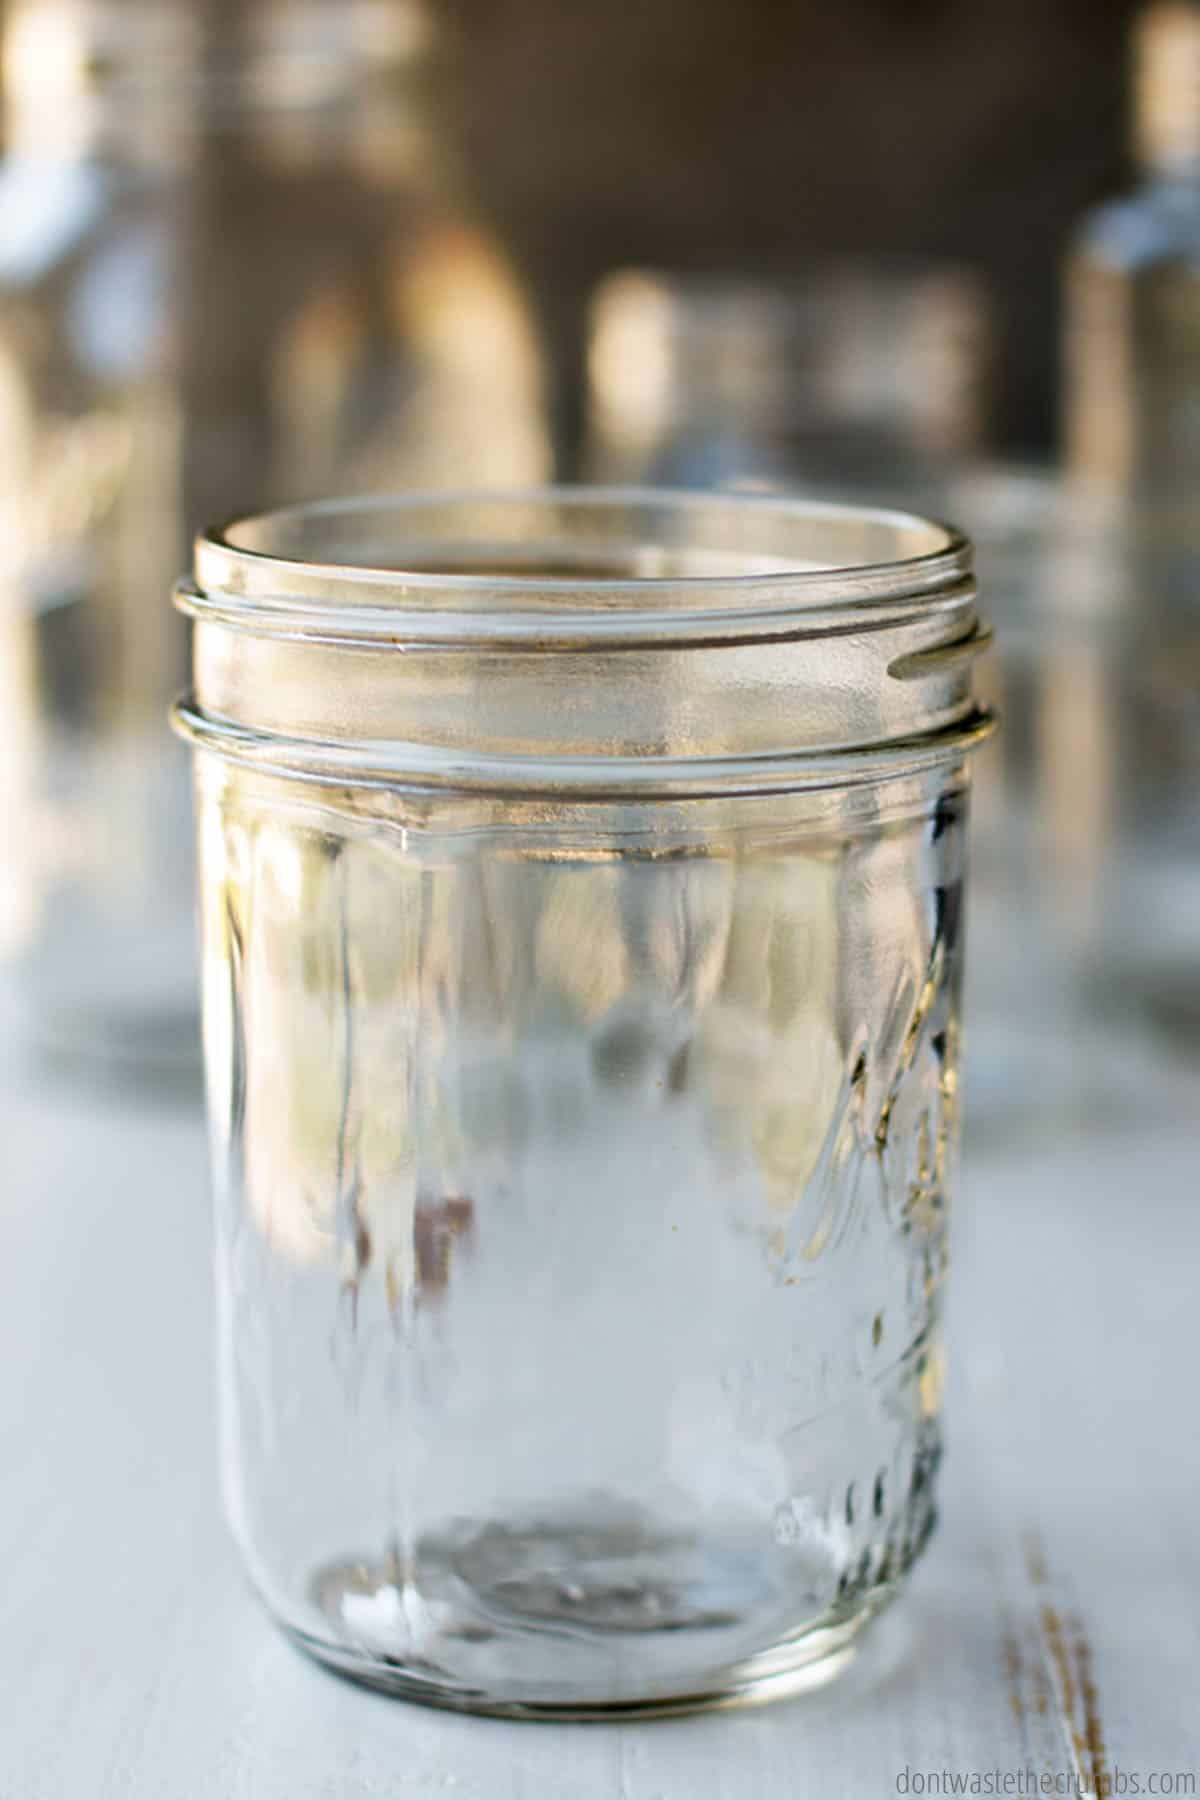 One Quick Tip: How to Freeze Stock in Glass Canning Jars